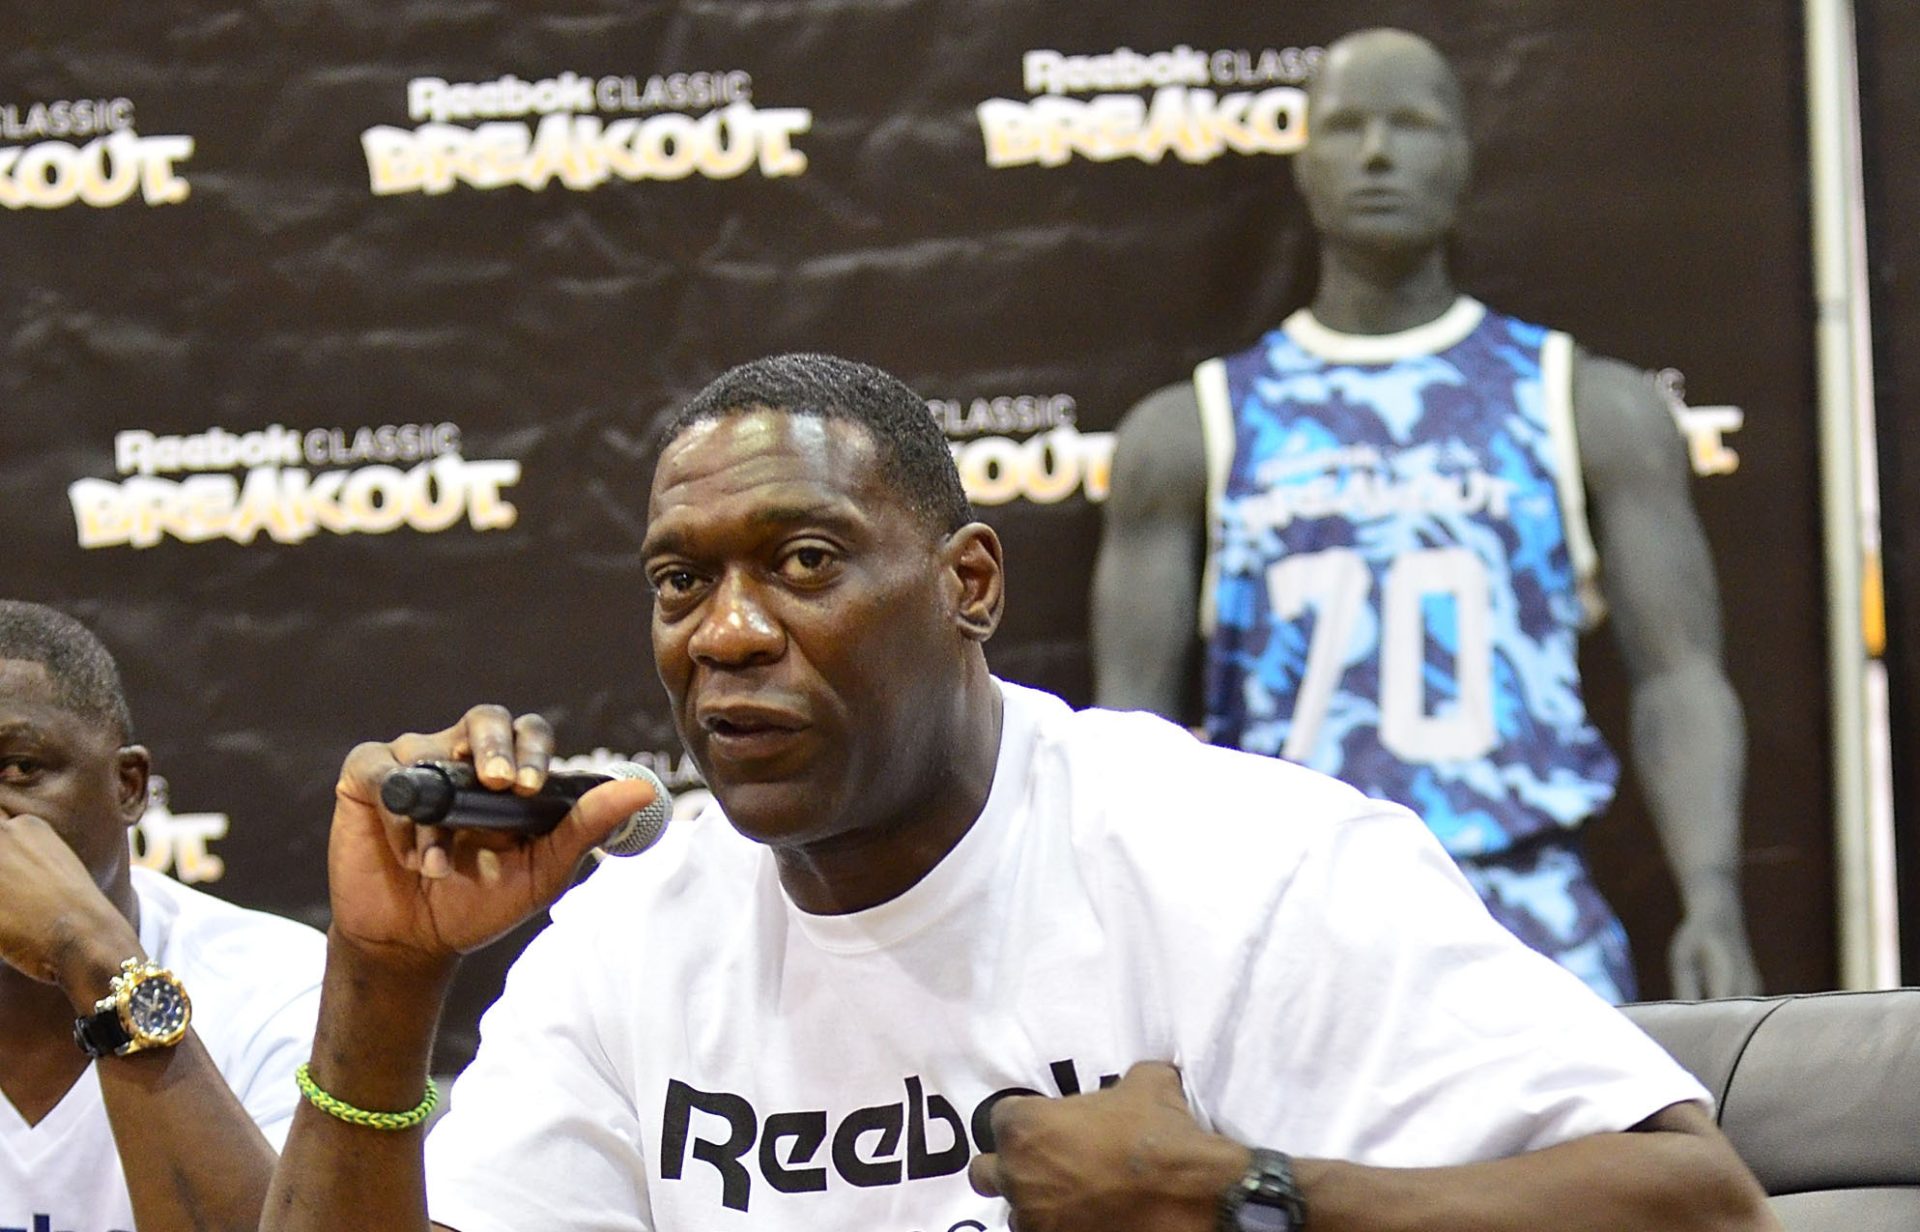 Former NBA Star Shawn Kemp Arrested For Drive-By Shooting At Tacoma Mall (Video)